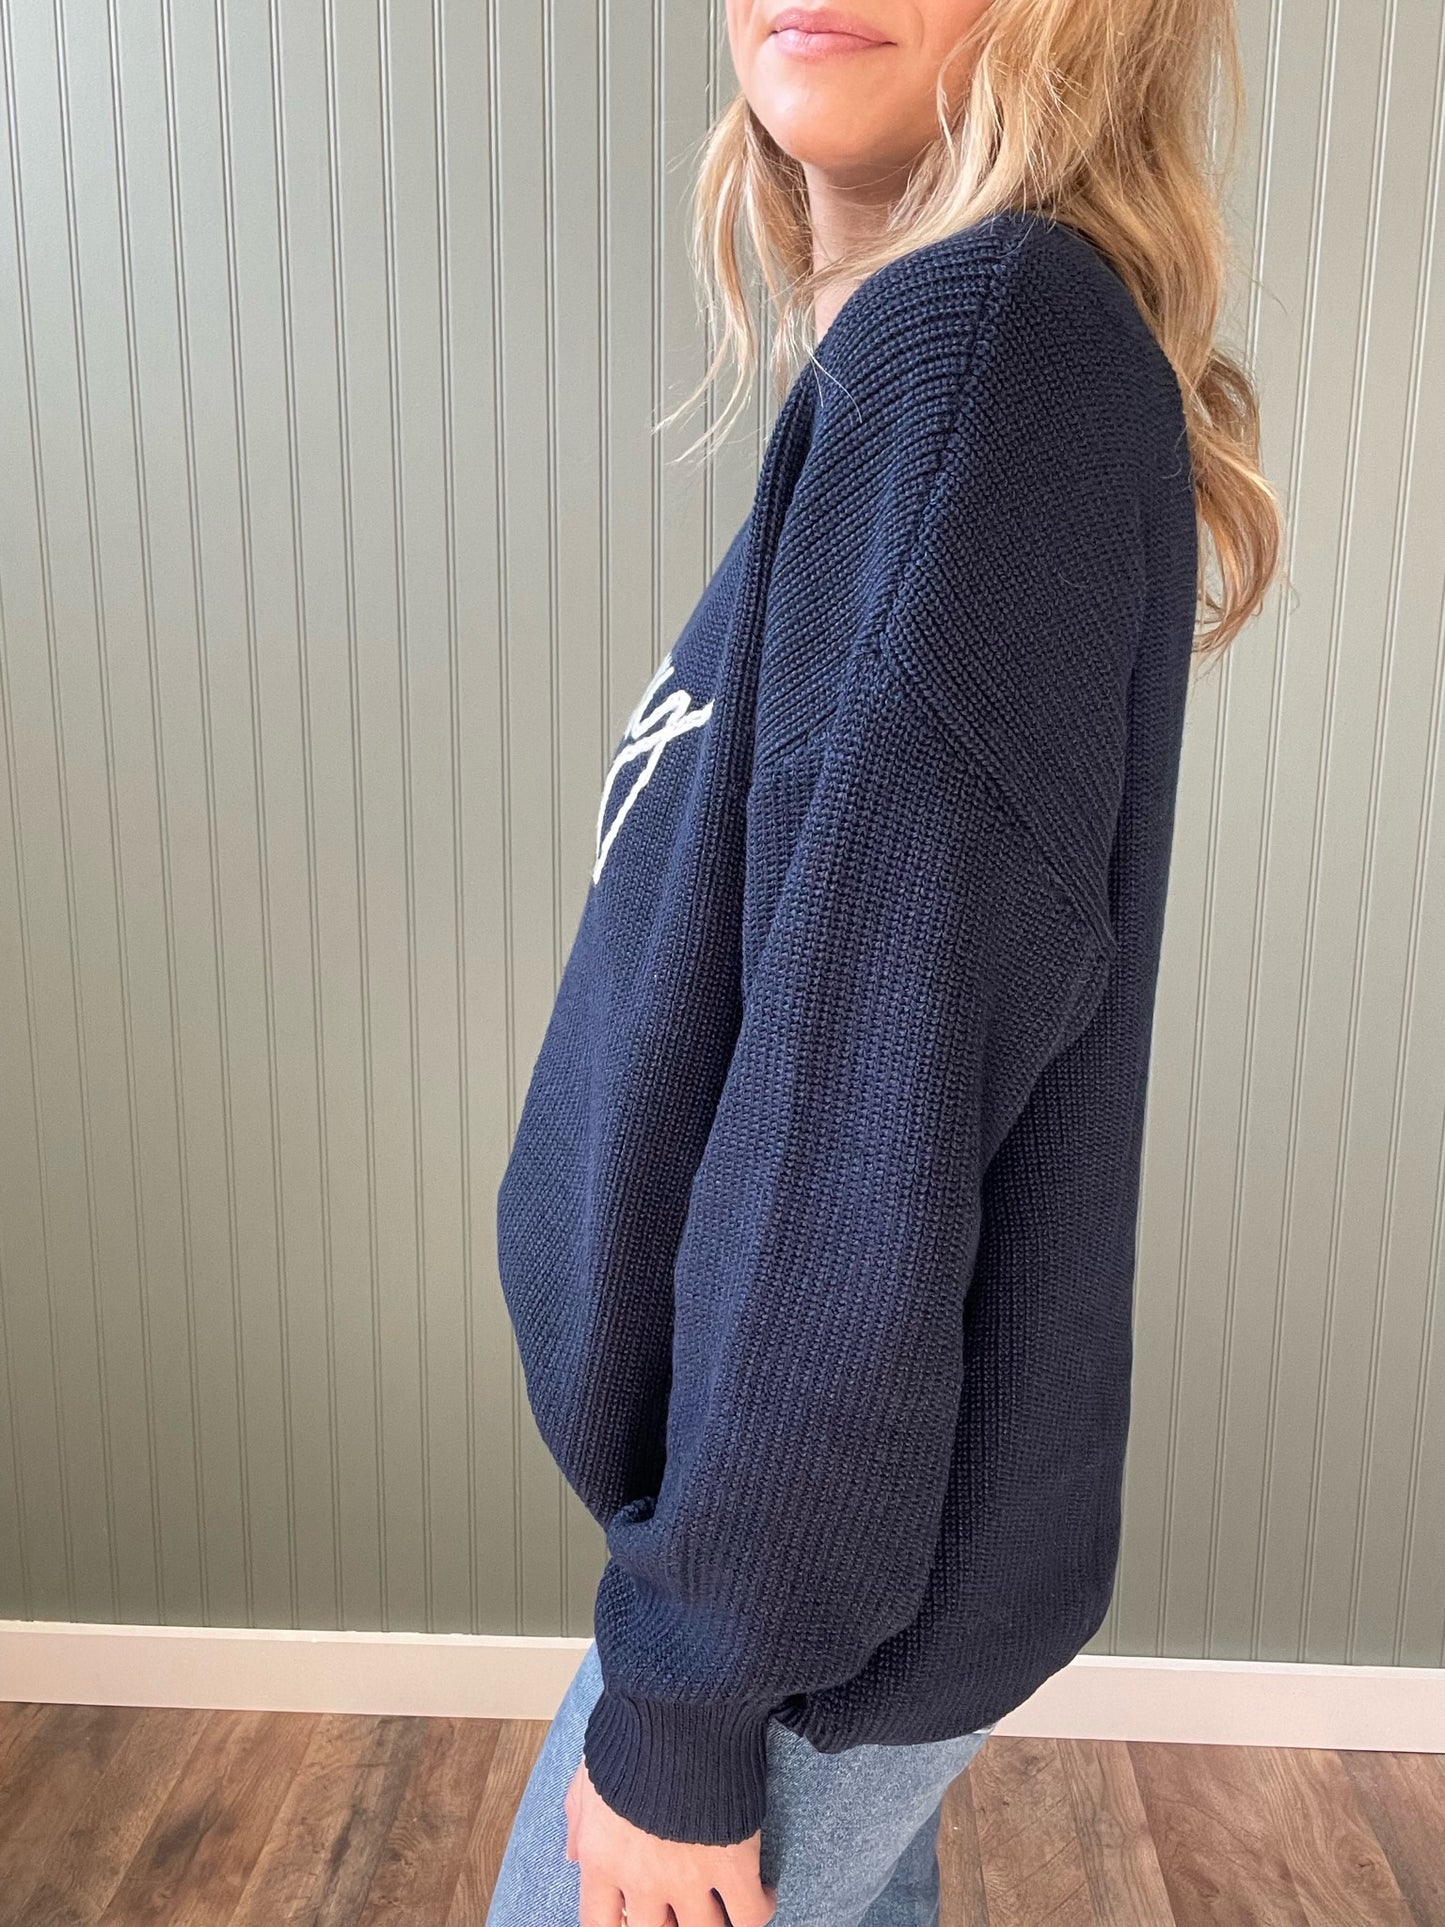 Vacay Sweater (Multiple Colors)